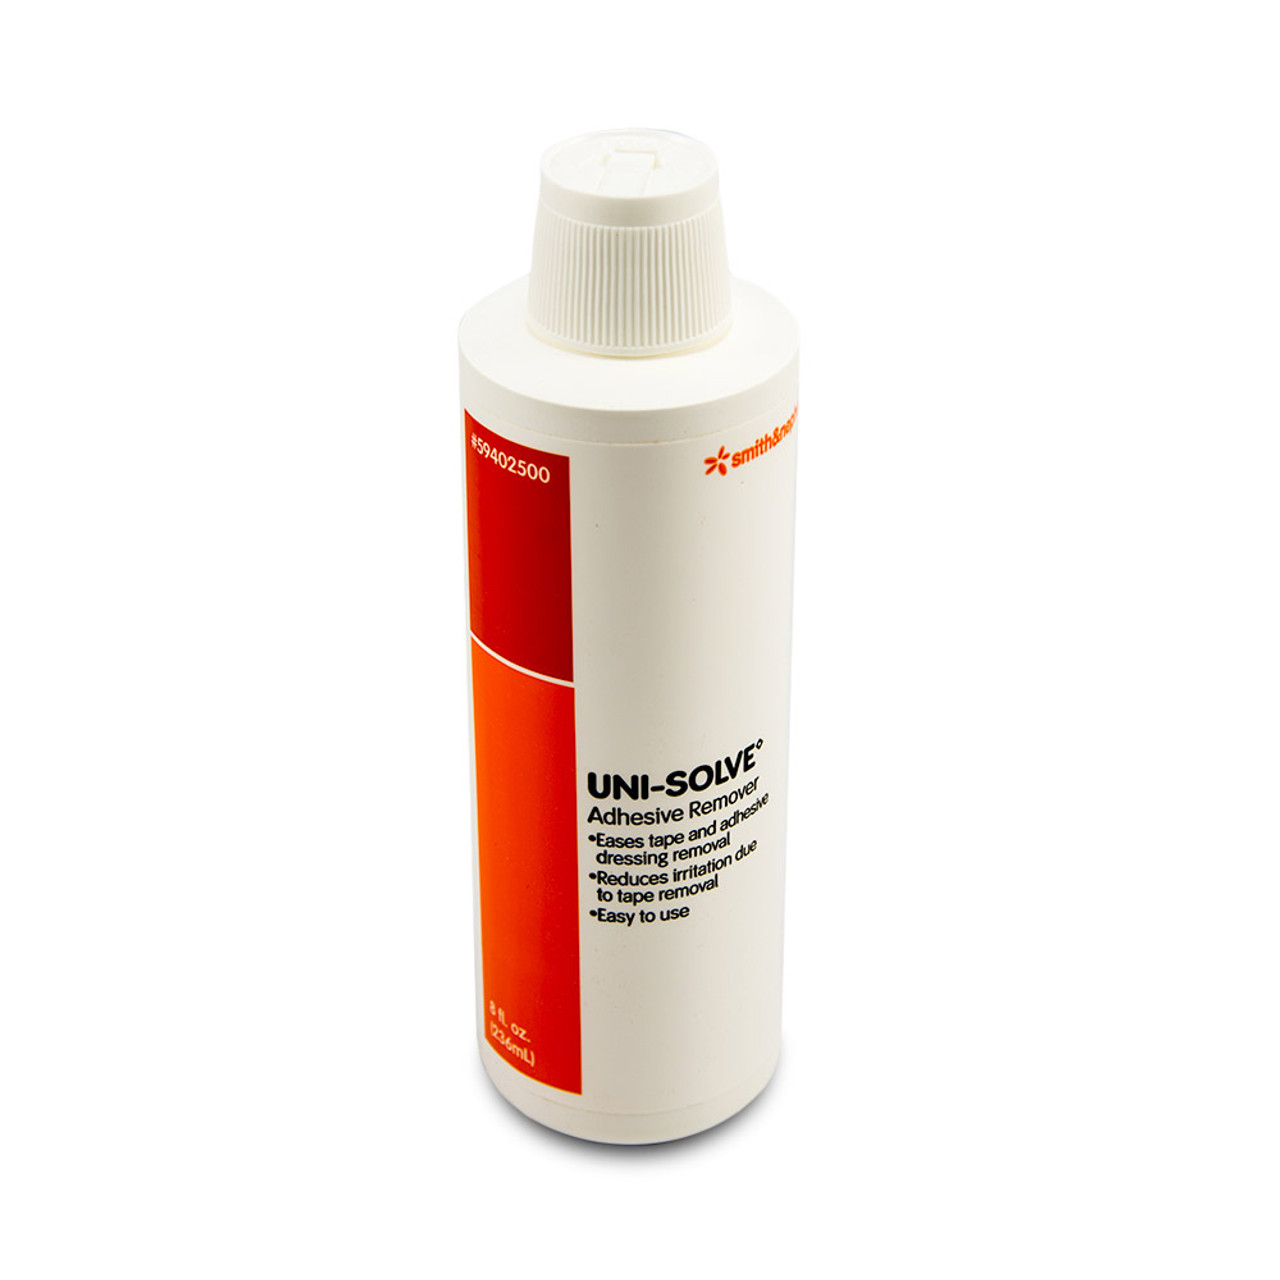 Uni-Solve Adhesive Remover (8 Ounce) Remove all Glue Types from  Ears_Wounds_Surgery Sites